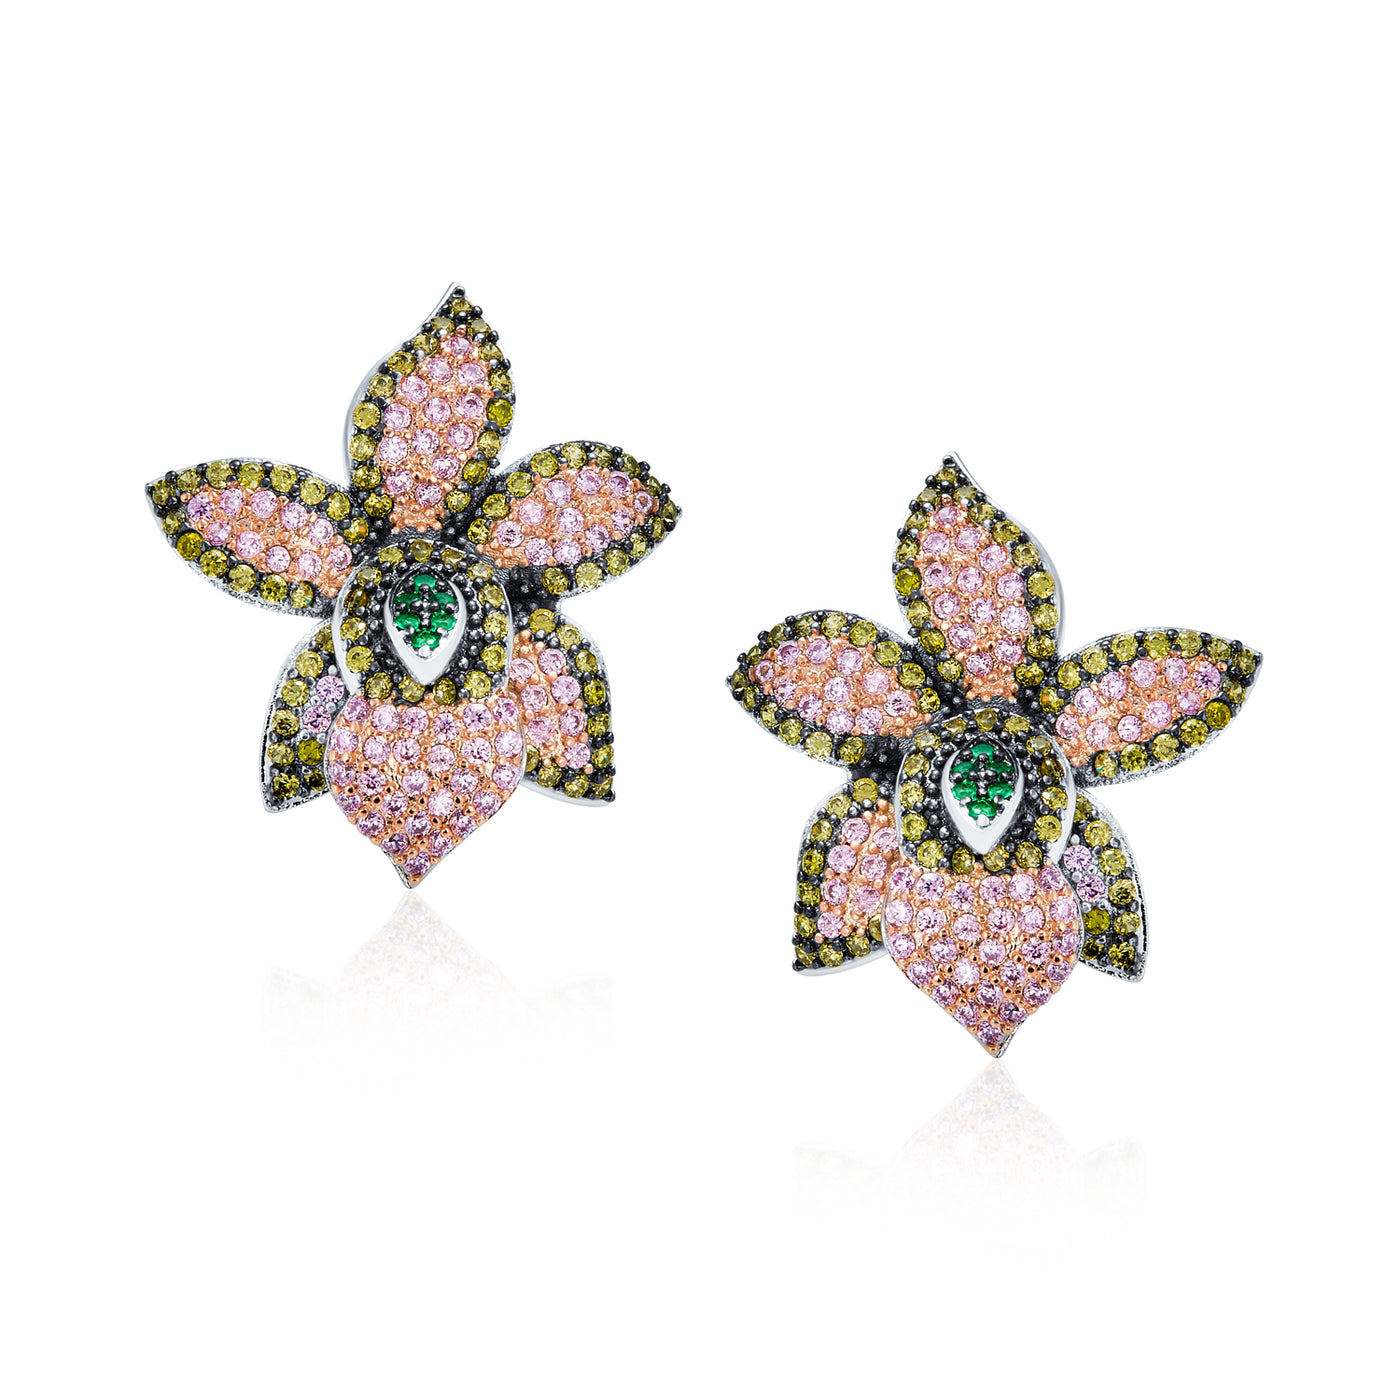 3D Pink Orchid Flower Shaped Pave CZ Stud Earrings Silver Plated